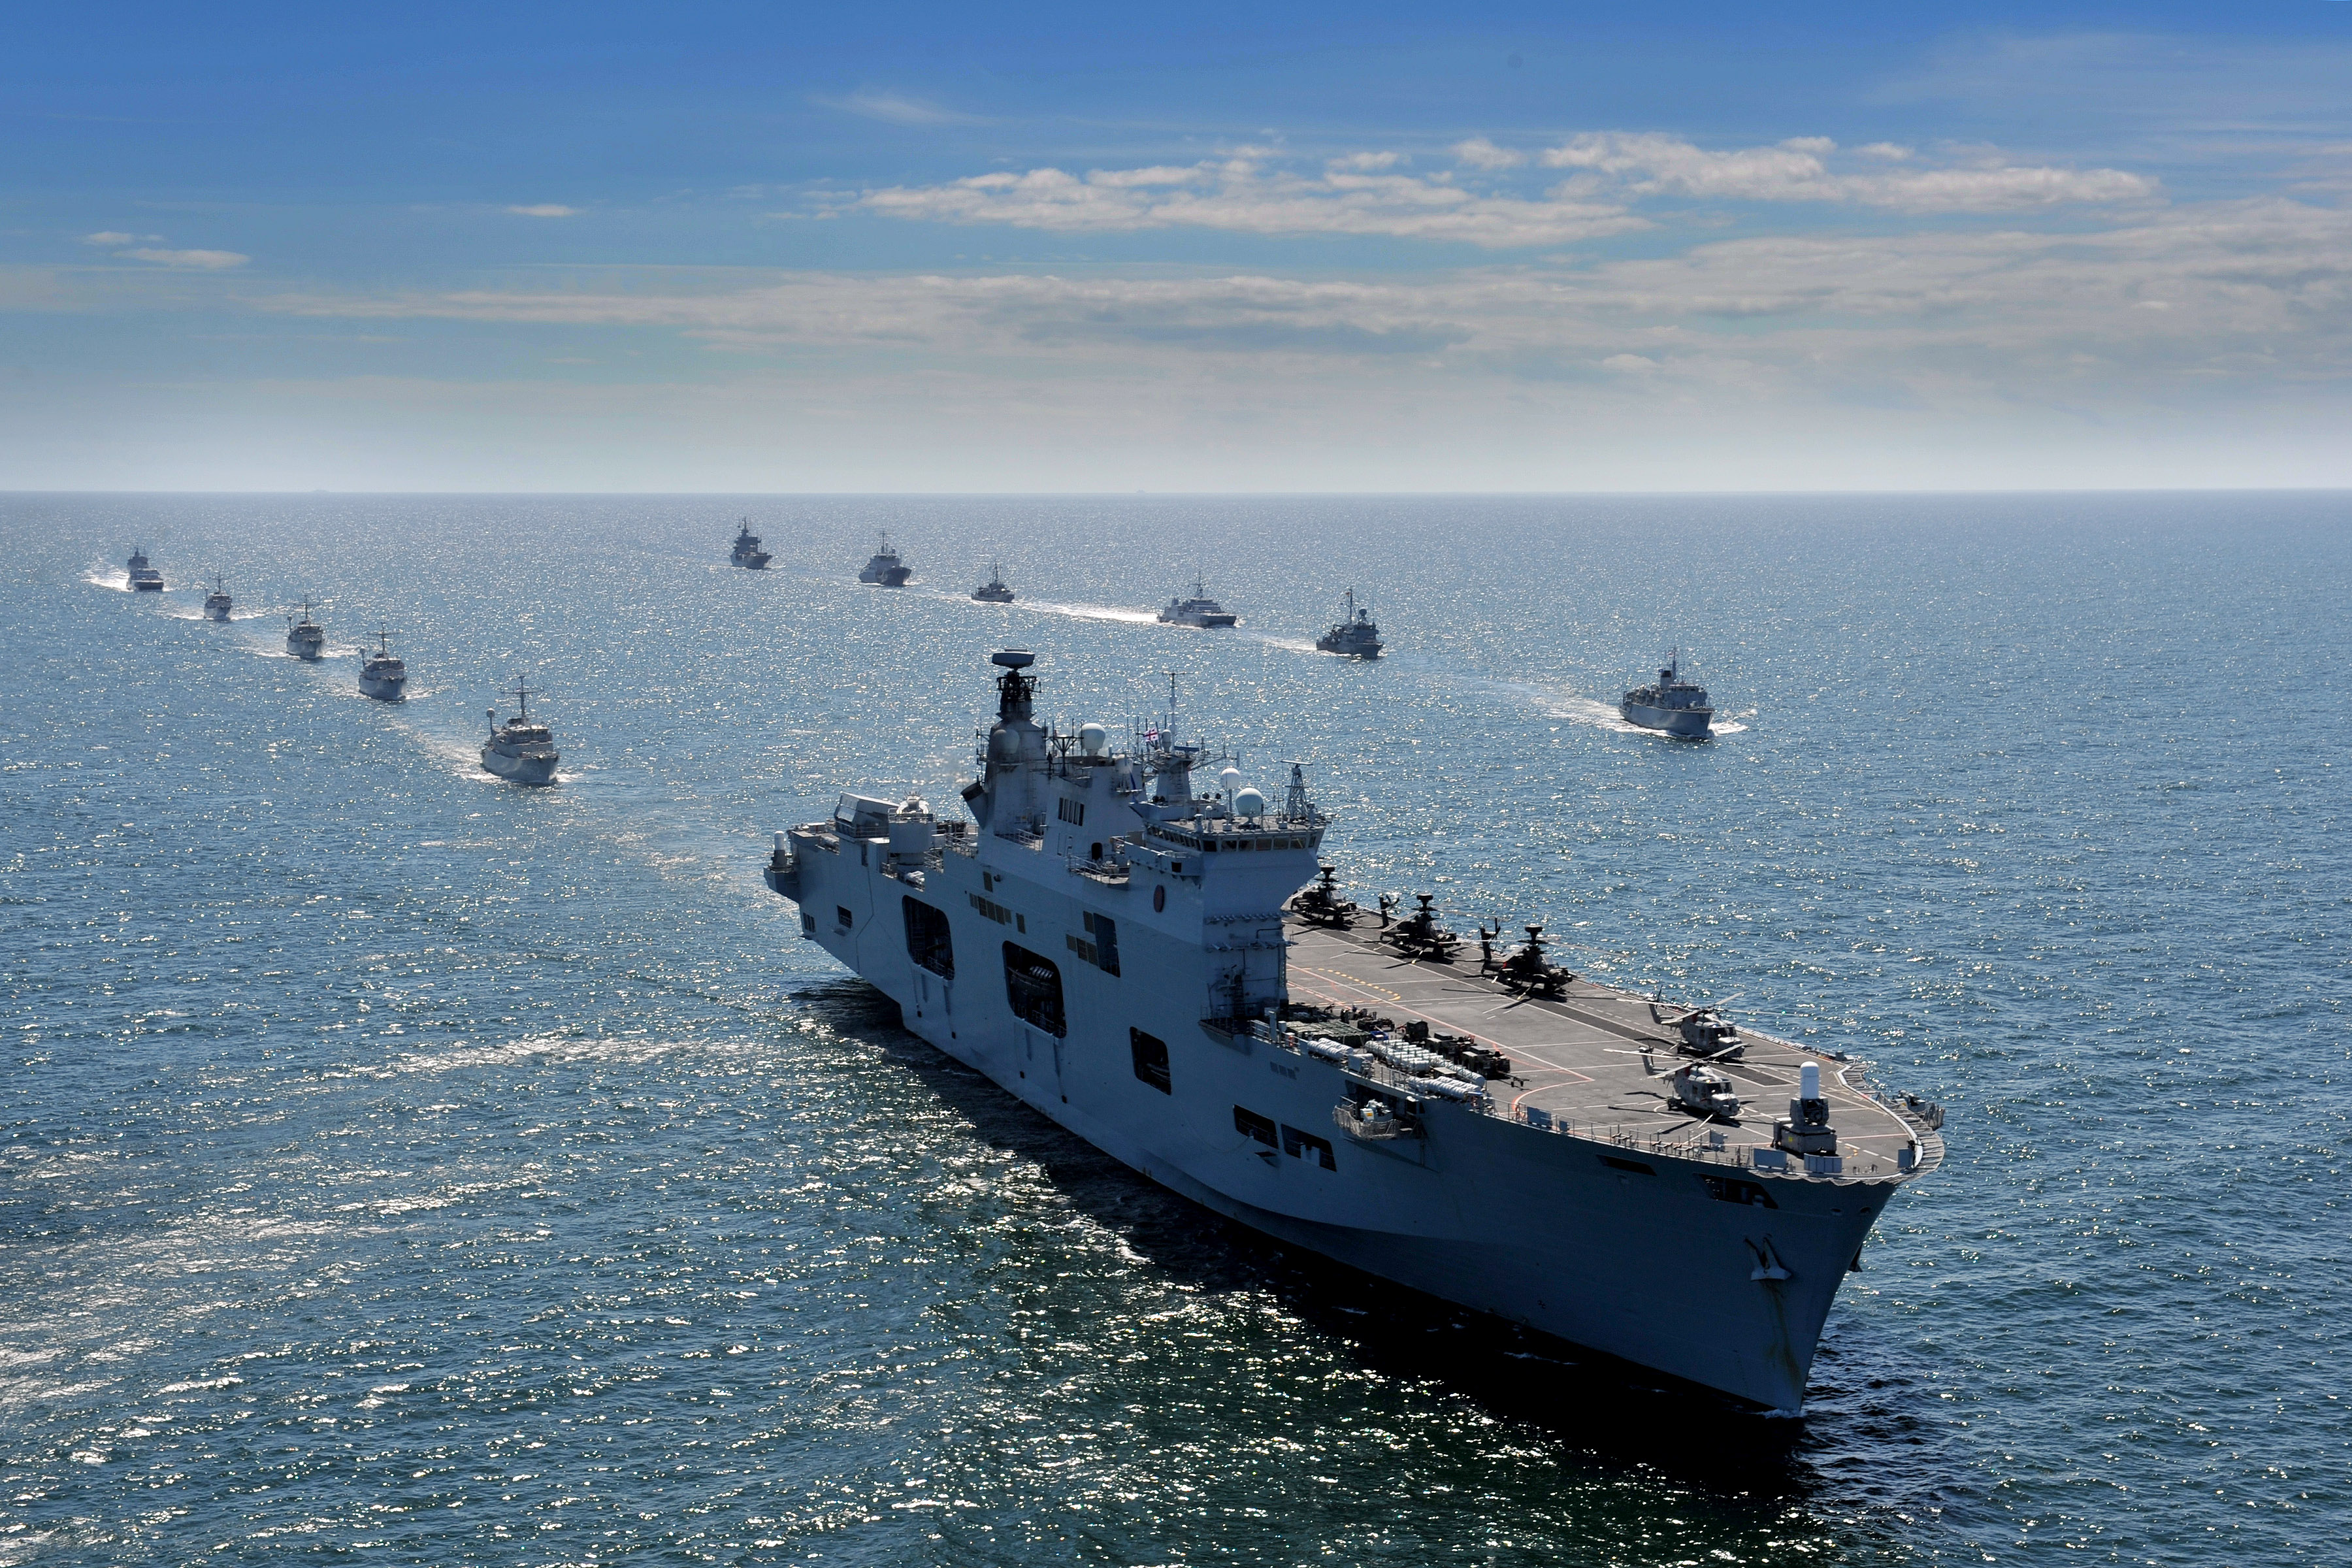 Maritime forces from 17 nations are underway in formation for BALTOPS 2015. BALTOPS is an annually recurring multinational exercise designed to enhance flexibility and interoperability, as well as demonstrate resolve of allied and partner forces to defend the Baltic region on June 8, 2015. US Navy Photo